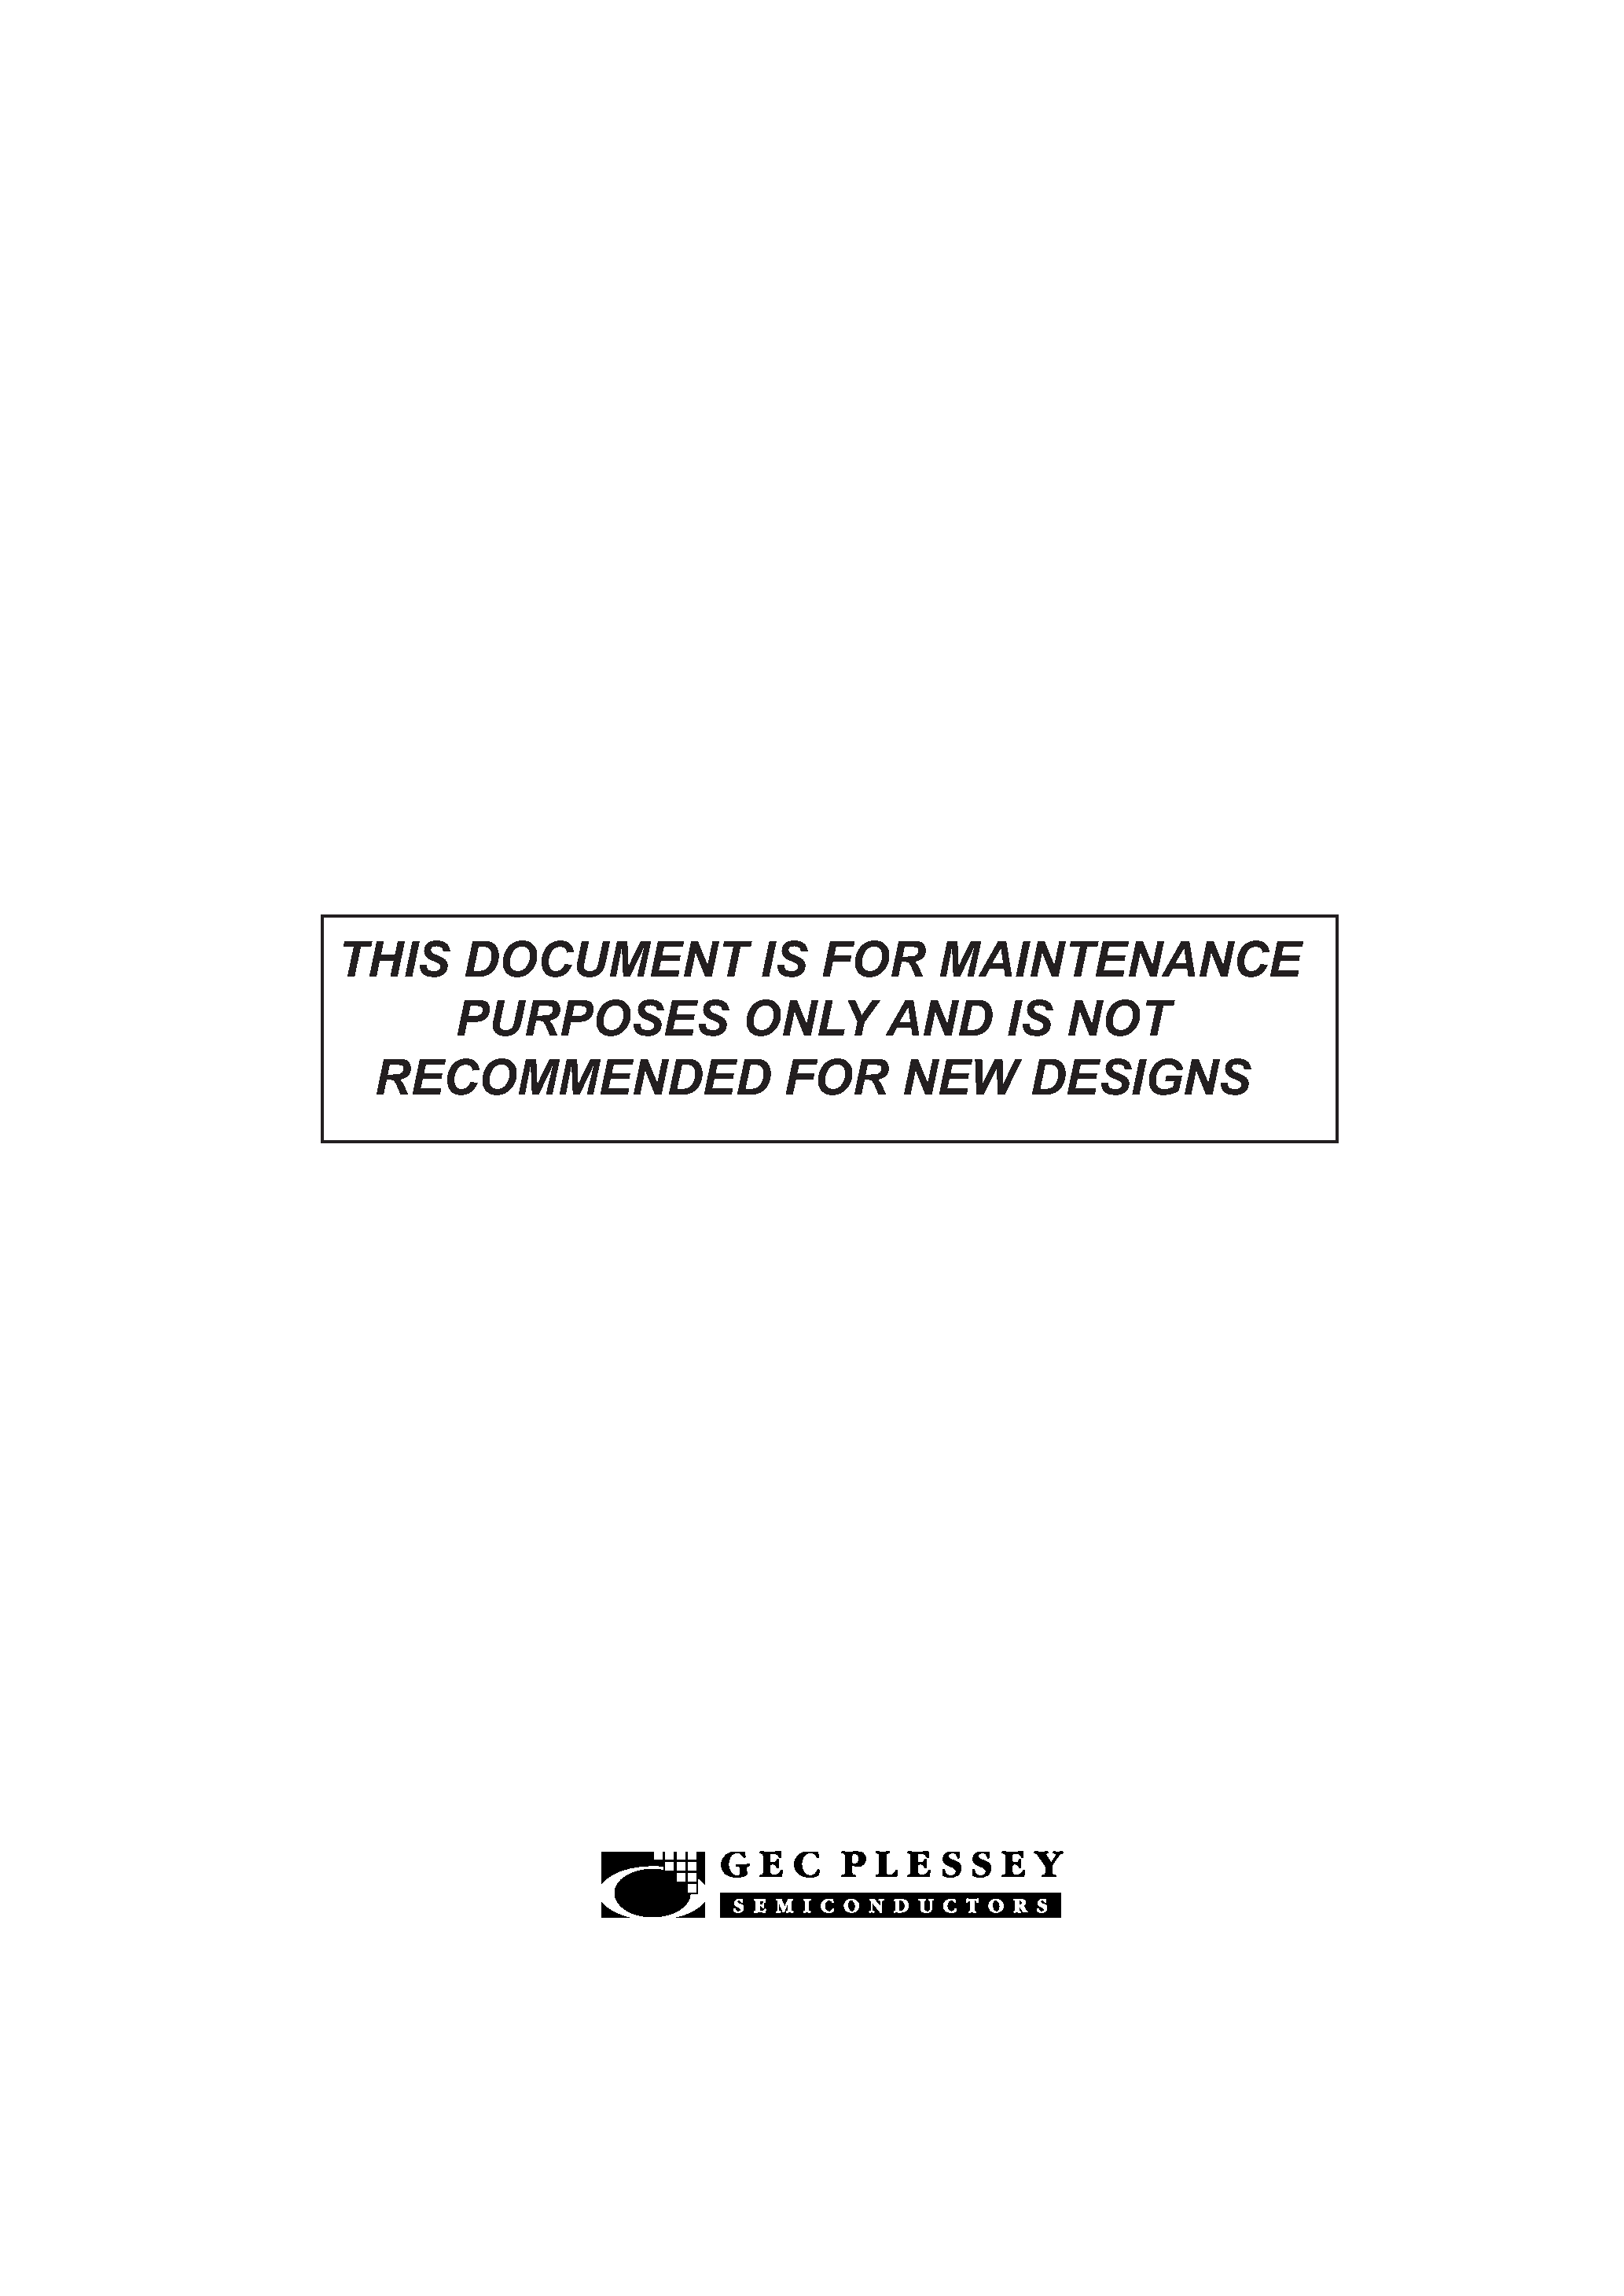 Даташит SL1640 - THIS DOCUMENT IS FOR MAINTENANCE PURPOSES ONLY AND IS NOT RECOMMENDED FOR NEW DESIGNS страница 1